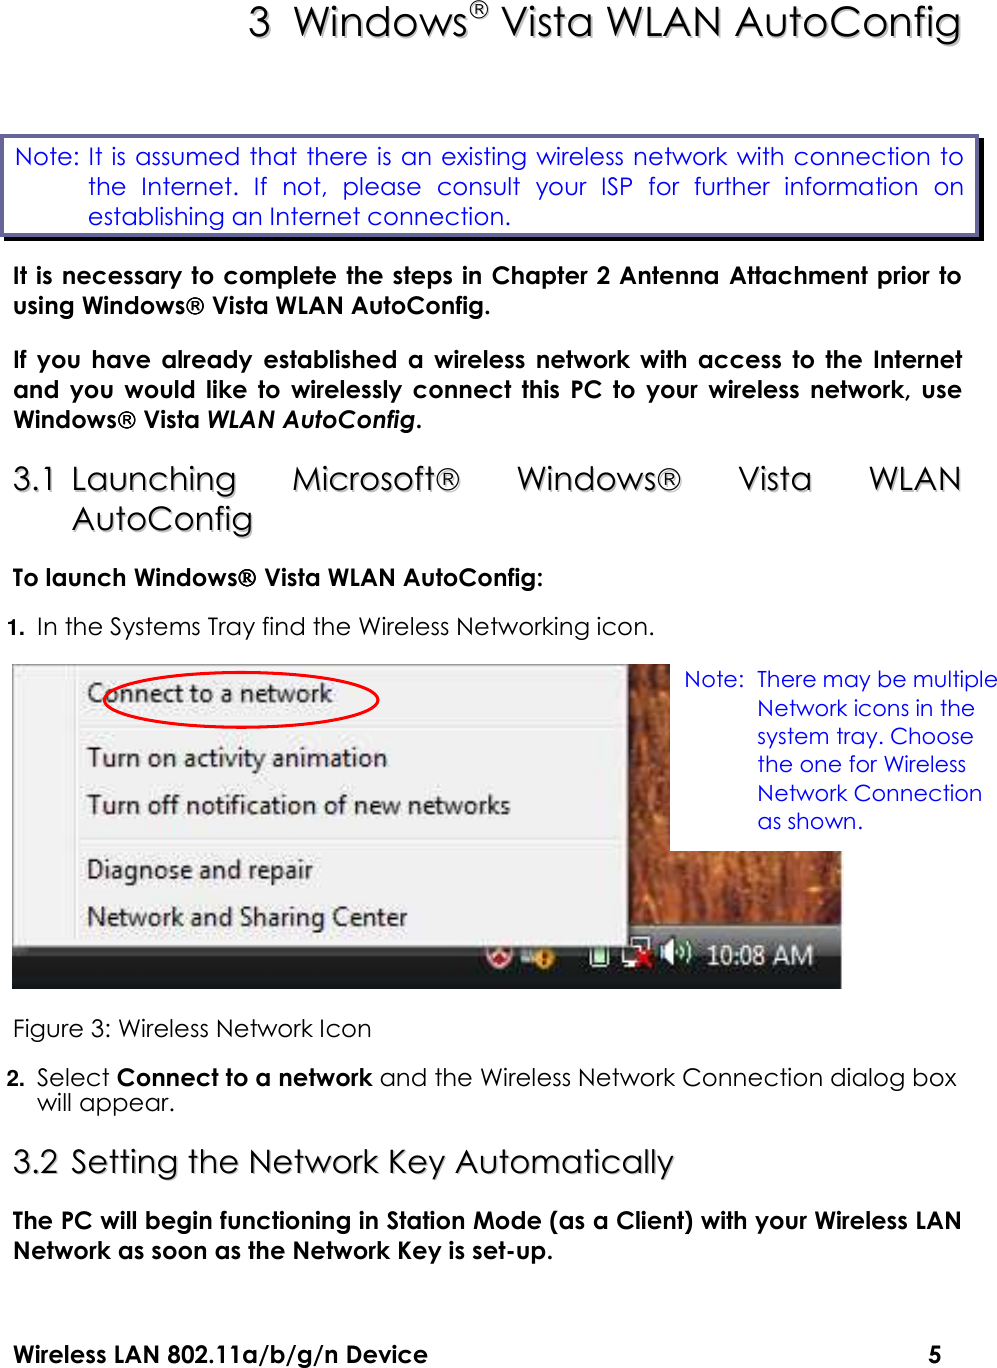 Wireless LAN 802.11a/b/g/n Device                                                                                  5 33  WWiinnddoowwss  VViissttaa  WWLLAANN  AAuuttooCCoonnffiigg  It is necessary to complete the steps in Chapter 2 Antenna Attachment prior to using Windows Vista WLAN AutoConfig. If  you  have  already  established  a  wireless  network  with  access  to  the  Internet and  you  would  like  to  wirelessly  connect  this  PC  to  your  wireless  network,  use Windows Vista WLAN AutoConfig. 33..11  LLaauunncchhiinngg  MMiiccrroossoofftt  WWiinnddoowwss  VViissttaa  WWLLAANN  AAuuttooCCoonnffiigg    To launch Windows Vista WLAN AutoConfig: 1. In the Systems Tray find the Wireless Networking icon.  Figure 3: Wireless Network Icon 2. Select Connect to a network and the Wireless Network Connection dialog box will appear. 33..22  SSeettttiinngg  tthhee  NNeettwwoorrkk  KKeeyy  AAuuttoommaattiiccaallllyy  The PC will begin functioning in Station Mode (as a Client) with your Wireless LAN Network as soon as the Network Key is set-up. Note: It is assumed that there is an existing wireless network with connection to    the  Internet.  If  not,  please  consult  your  ISP  for  further  information  on establishing an Internet connection.  Note: There may be multiple Network icons in the system tray. Choose the one for Wireless Network Connection as shown. 